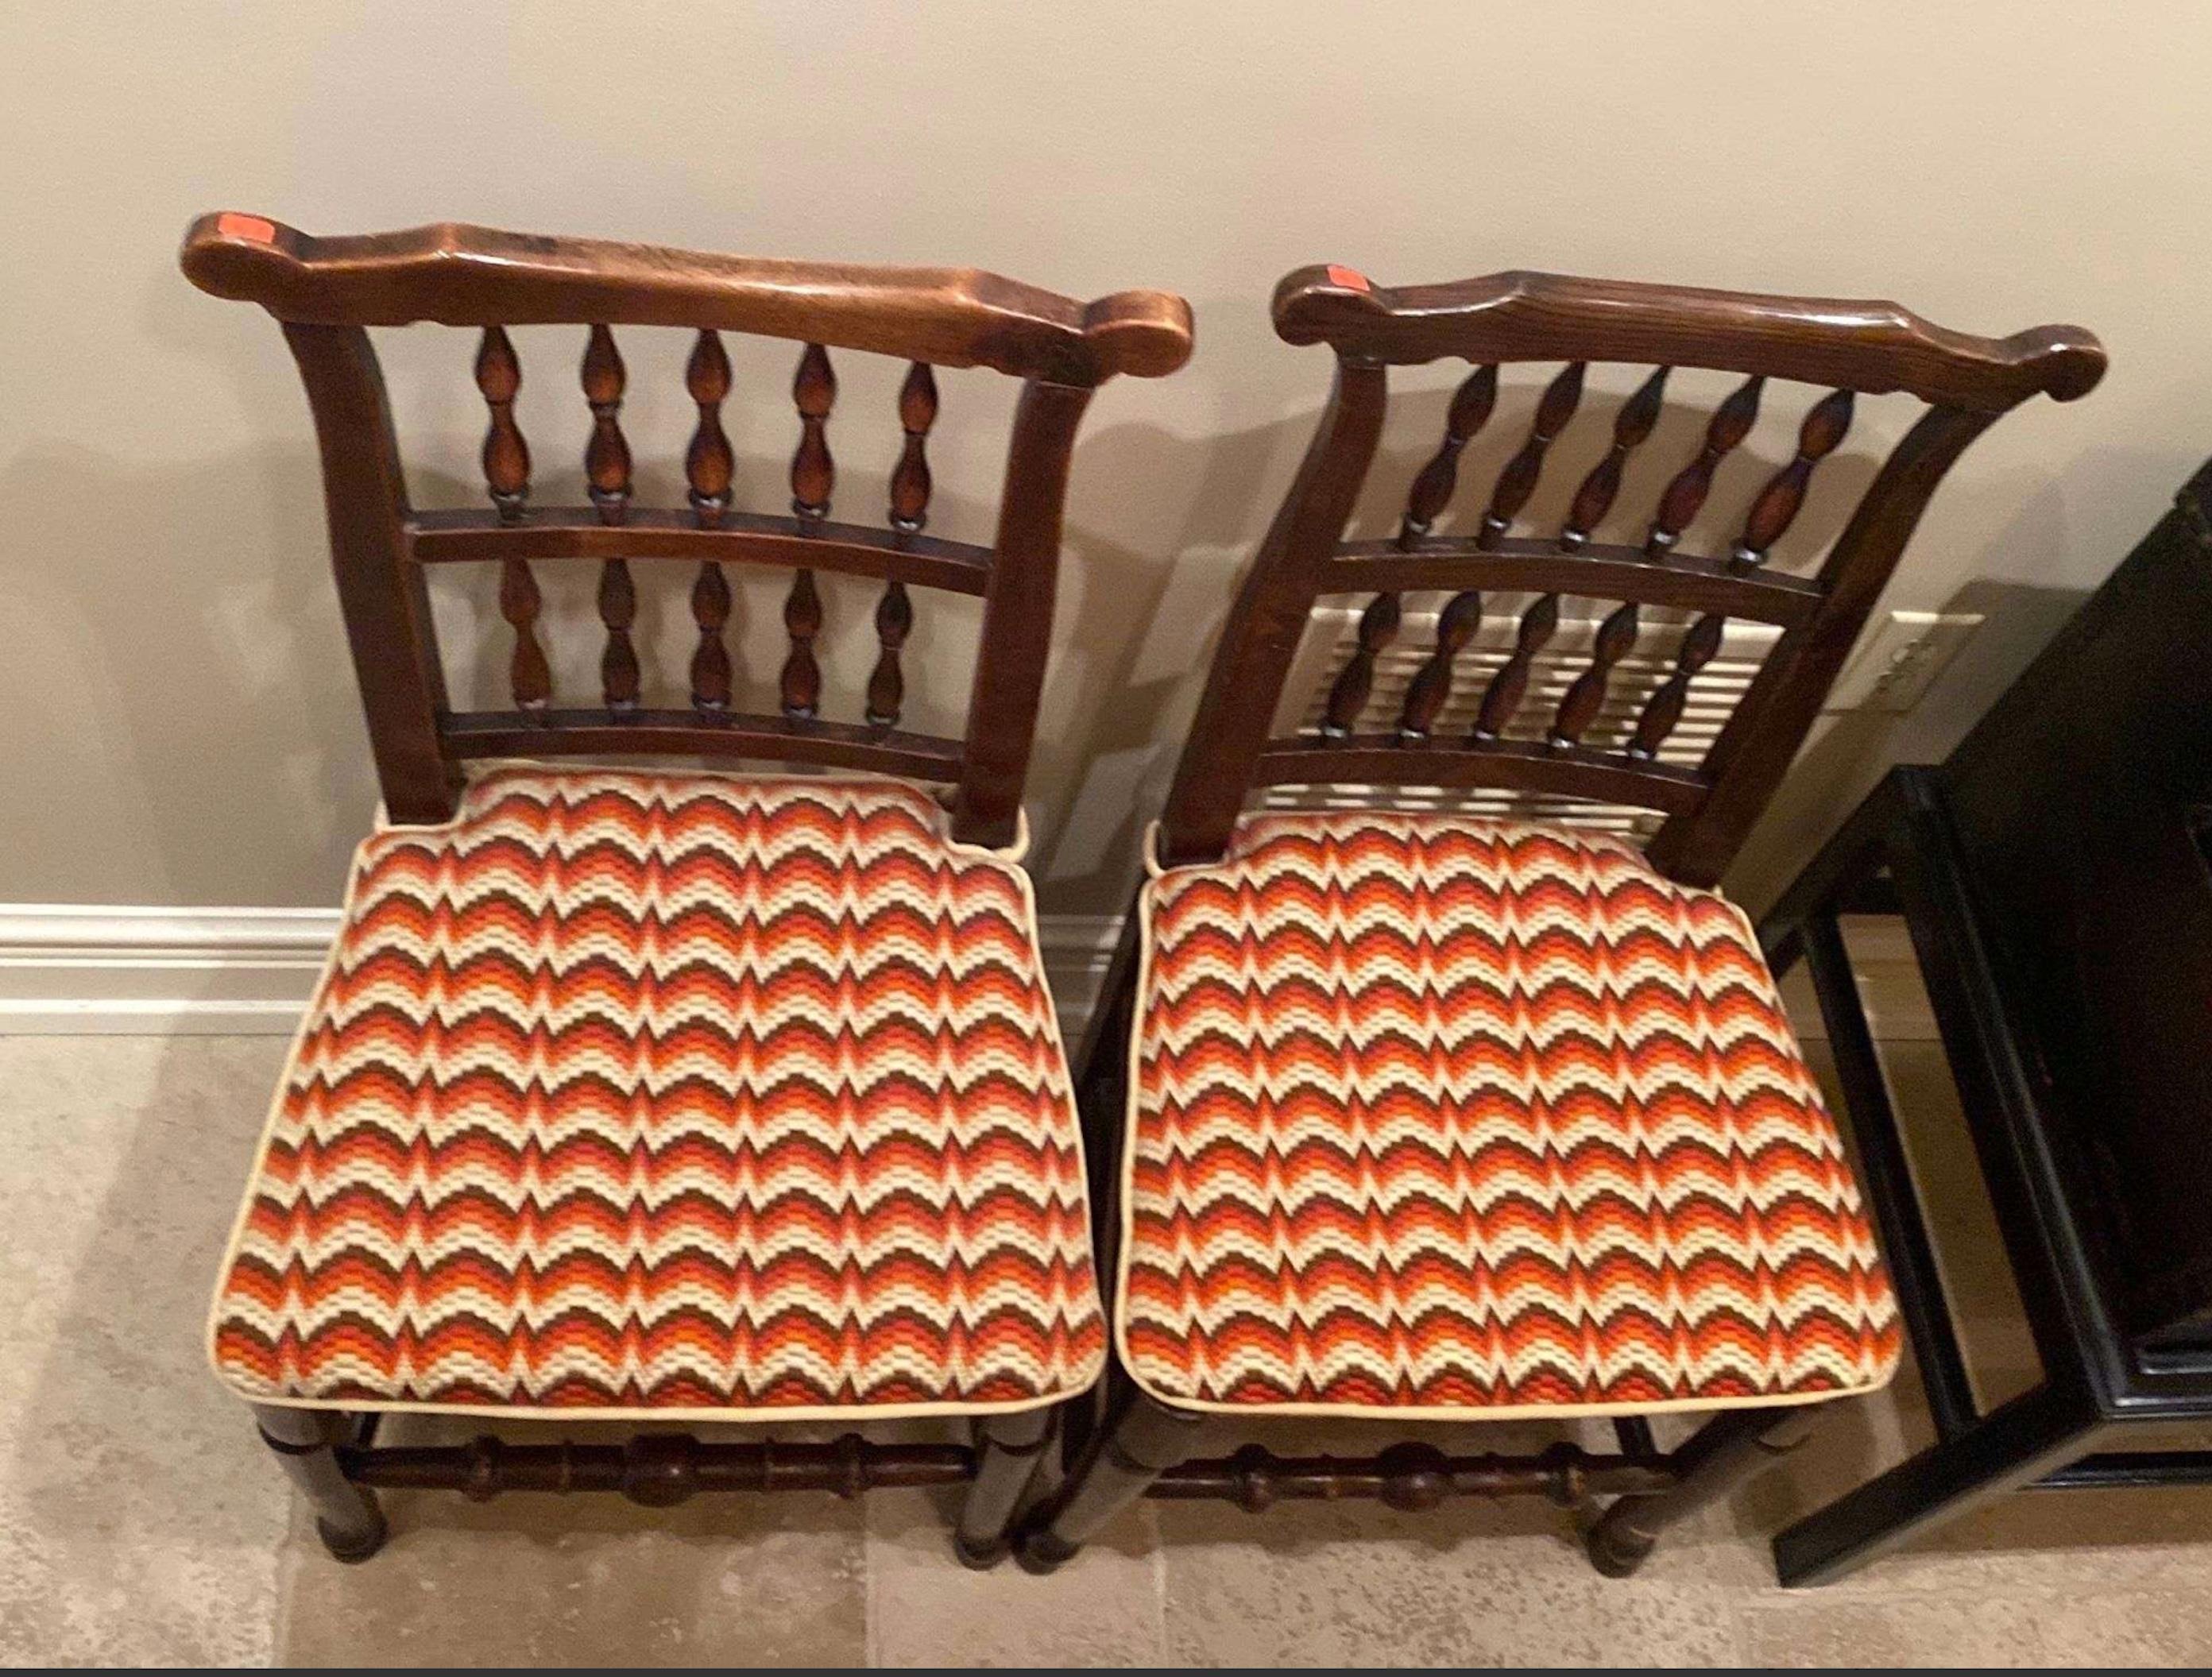 An assembled pair of George III Lancashire side chairs with ladder backs and rush woven seats.  Great color and patination. Priced Per Chair.